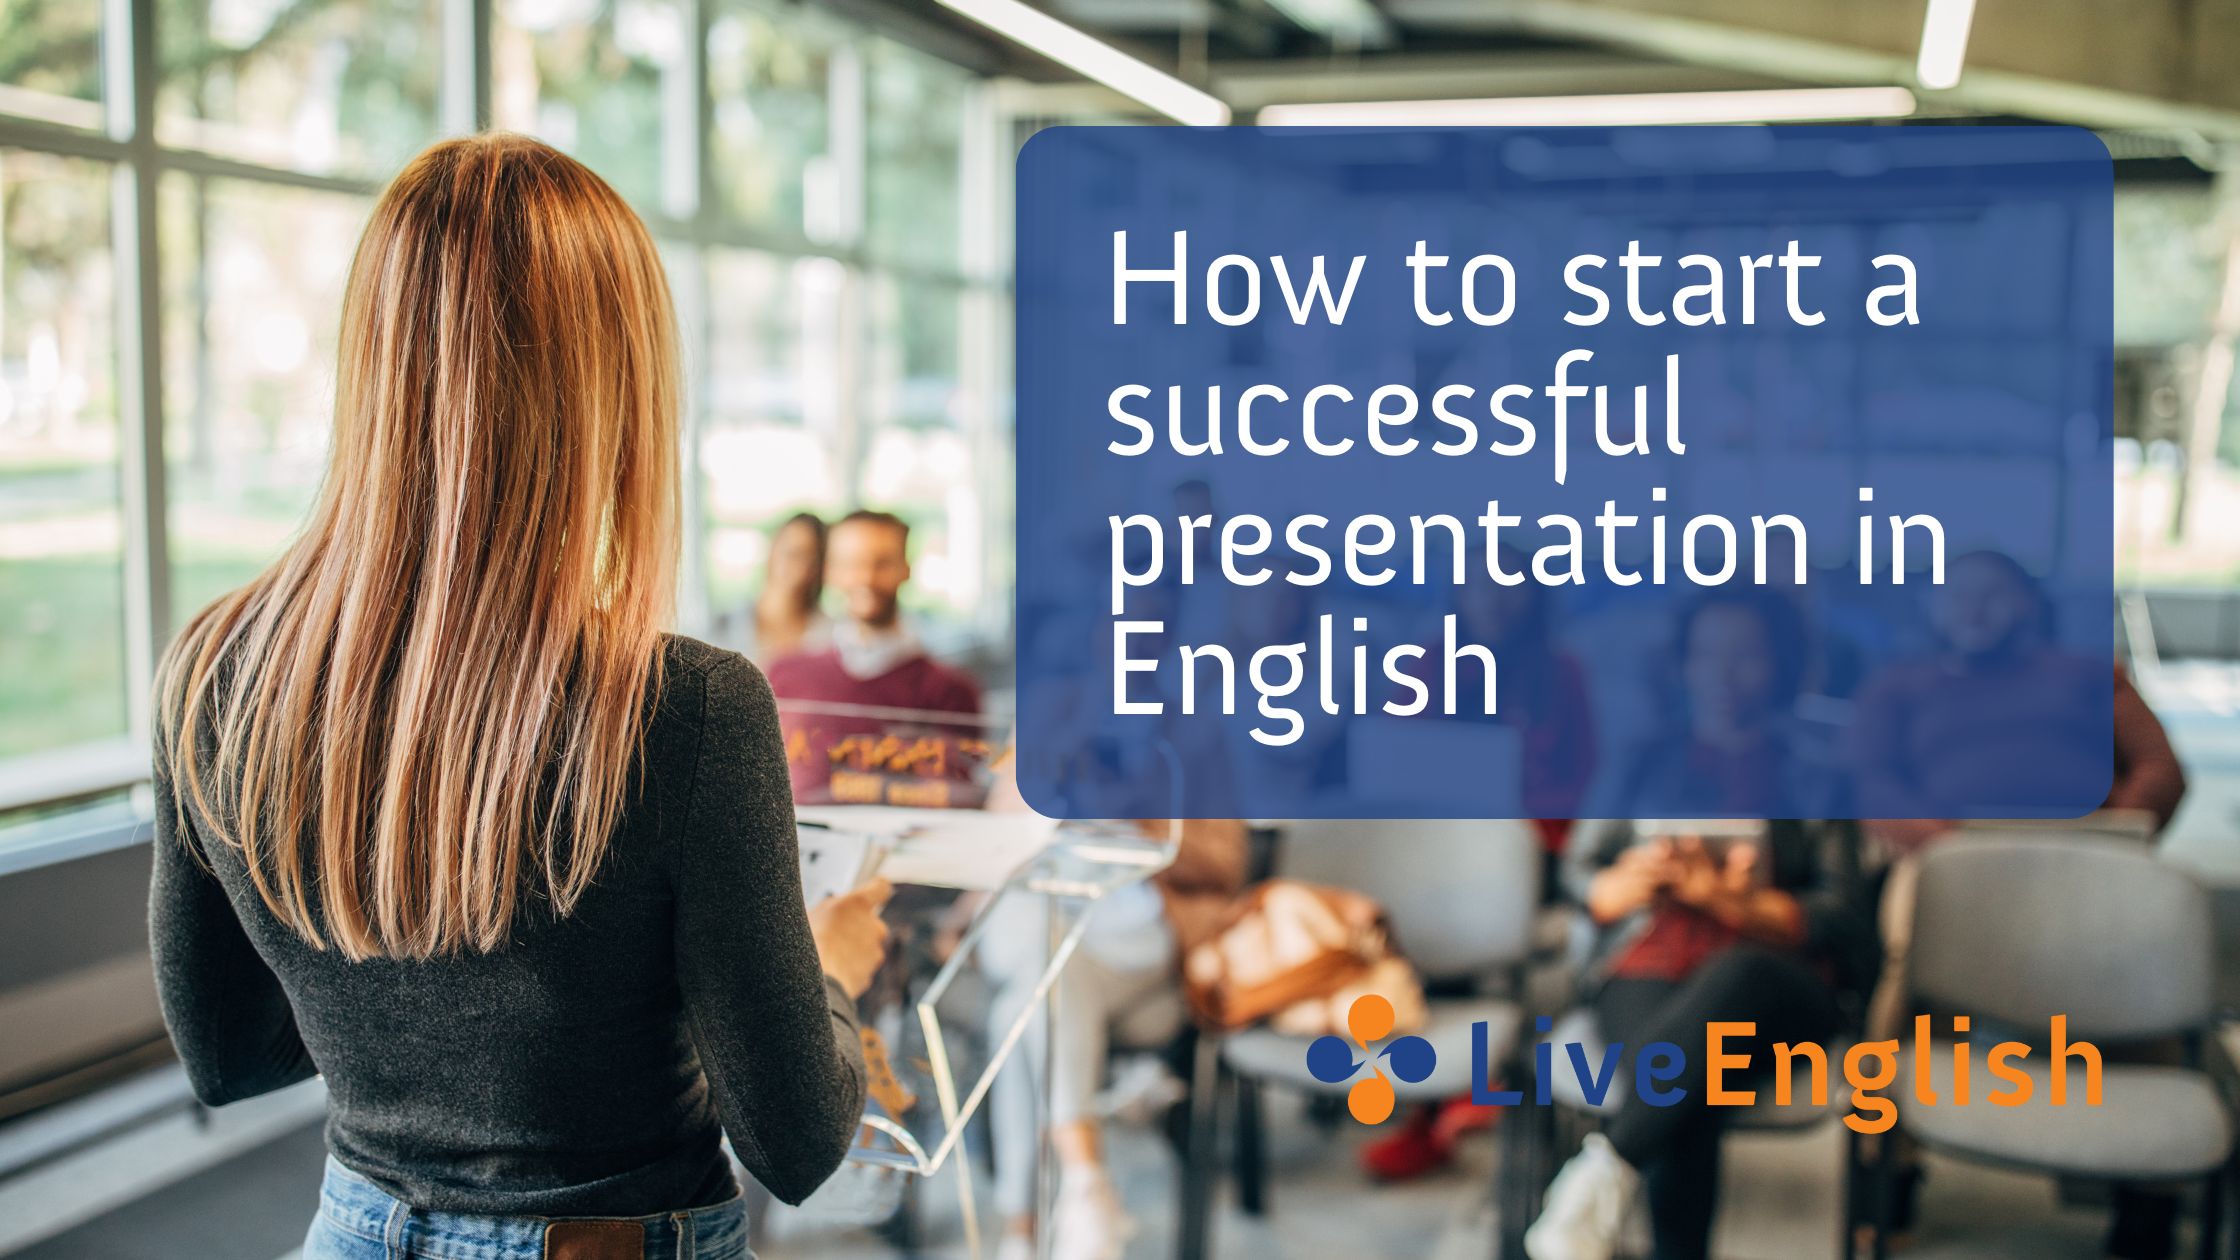 how to start presentation in english in college